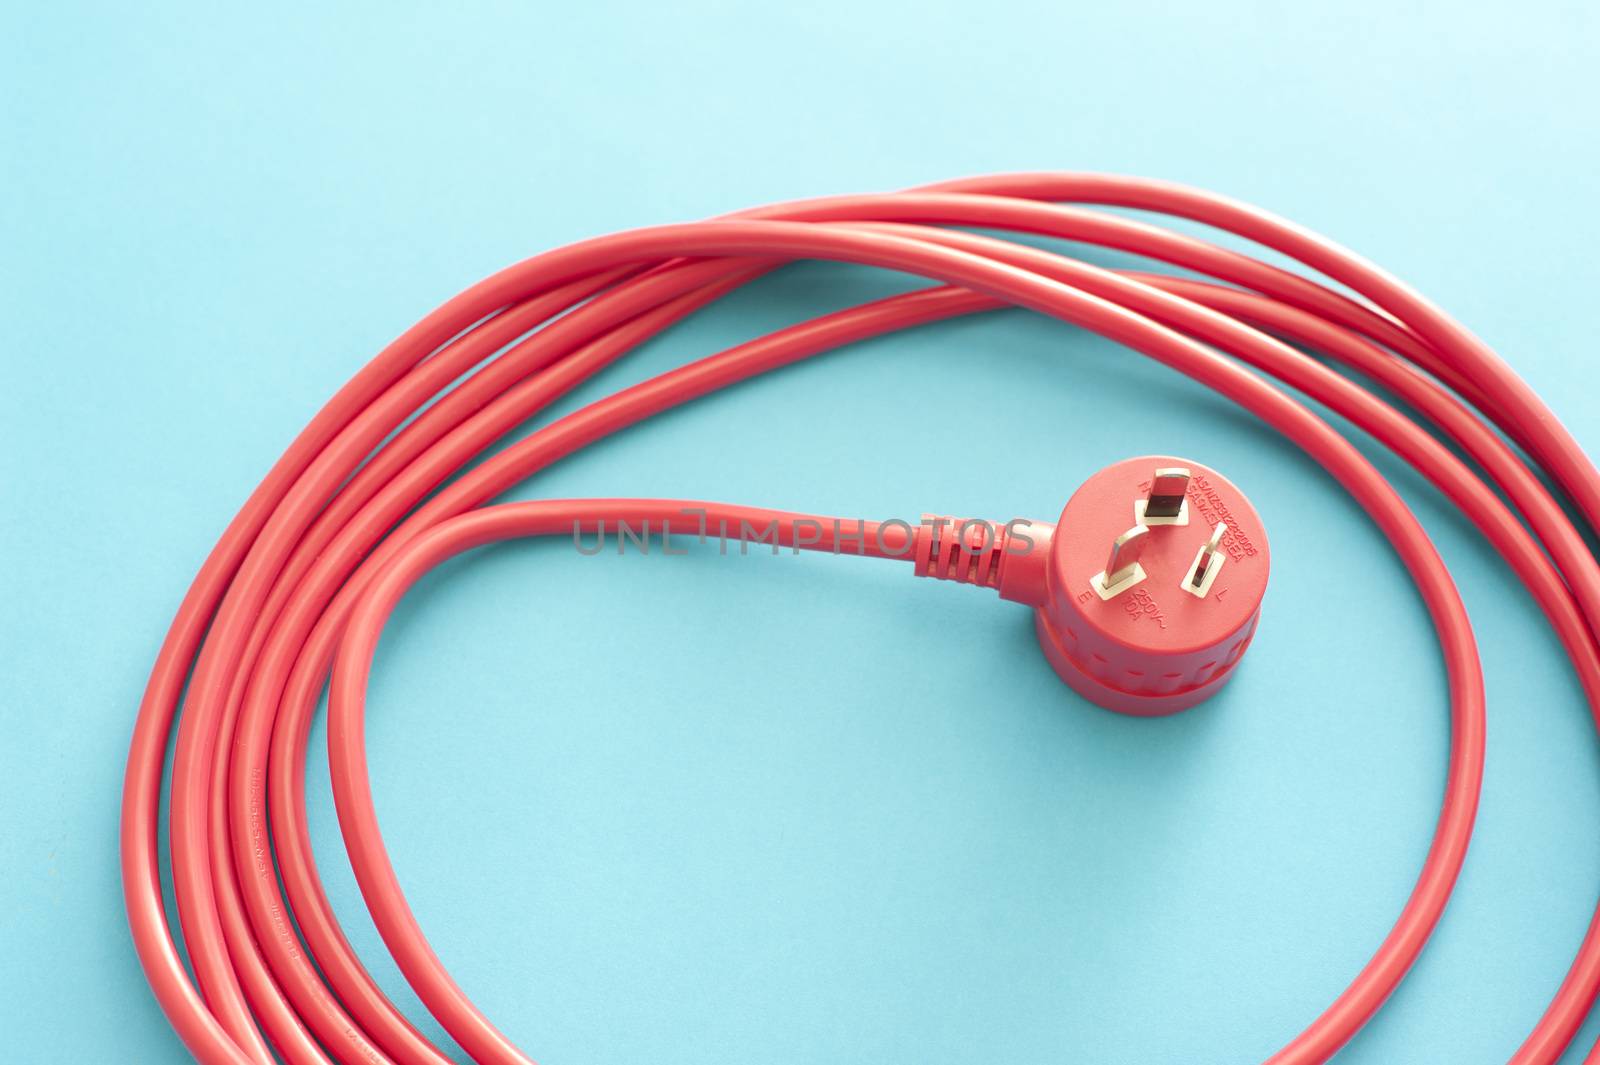 Long wound up red extension cord over blue background. Australian type plug receptacle.